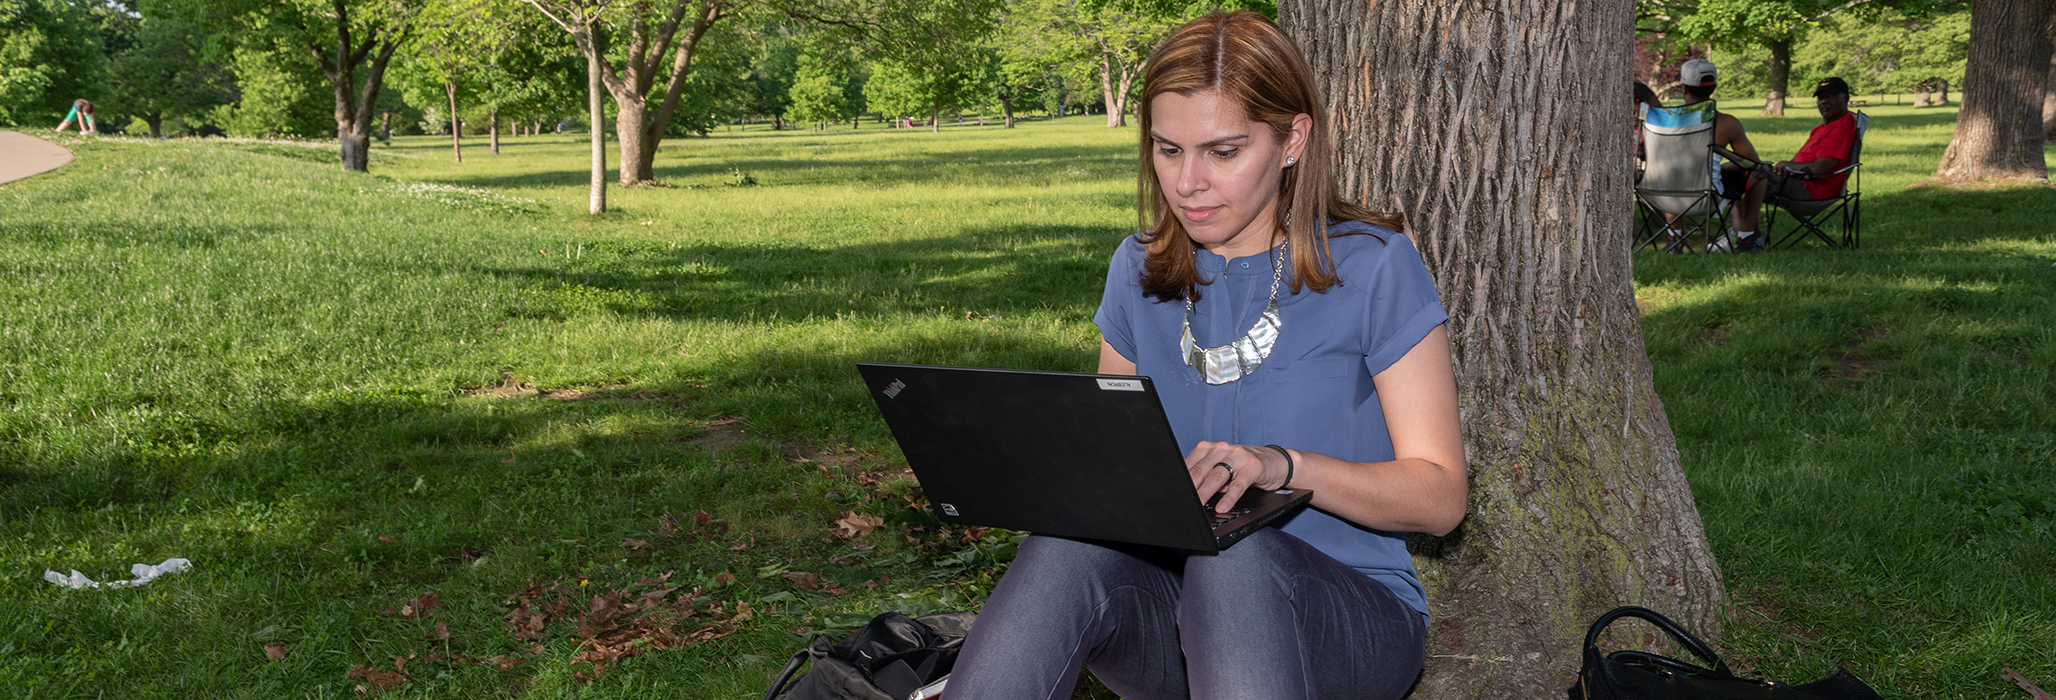 A Curry College graduate student works on her laptop in the park